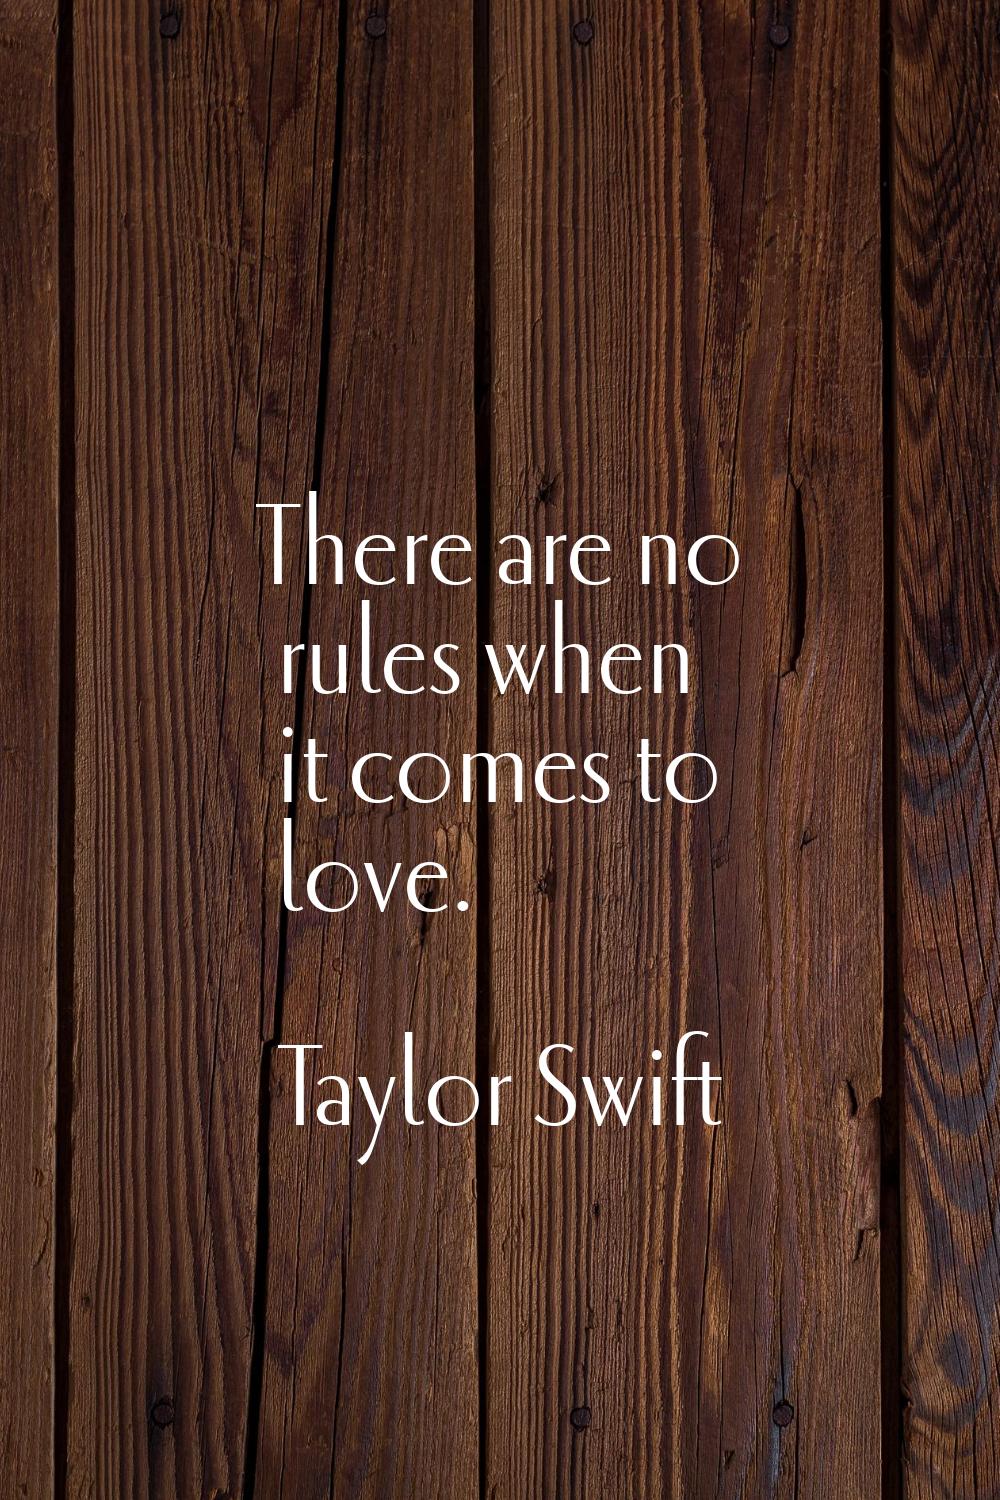 There are no rules when it comes to love.